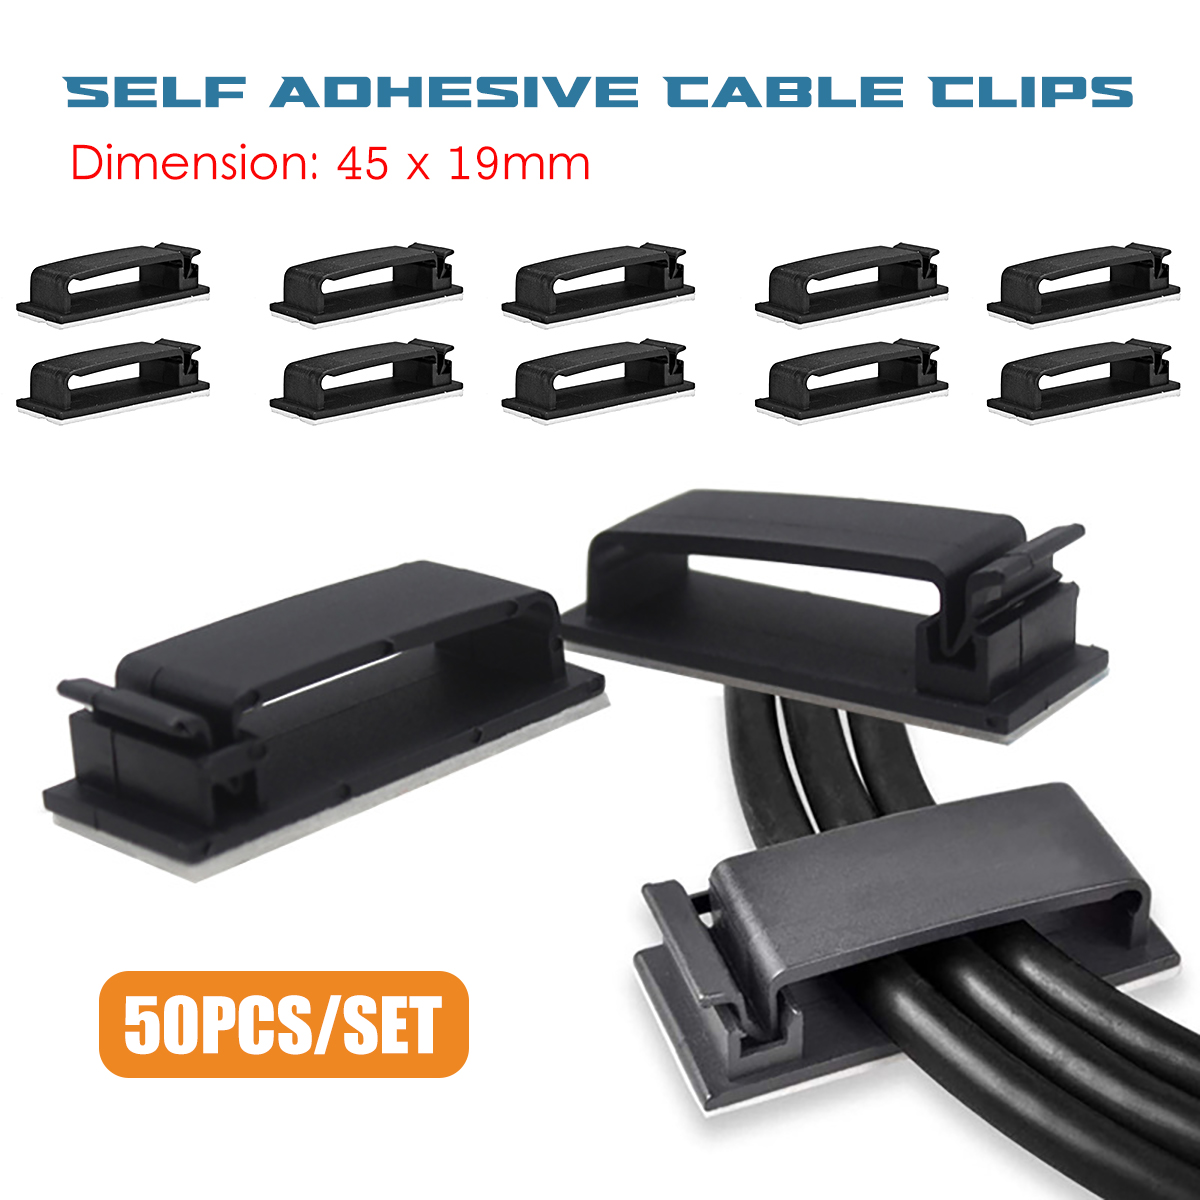 50Pcs-Cable-Clips-Self-Adhesive-Cord-Management-Wire-Holder-Organizer-Clamp-for-Computer-1935352-1